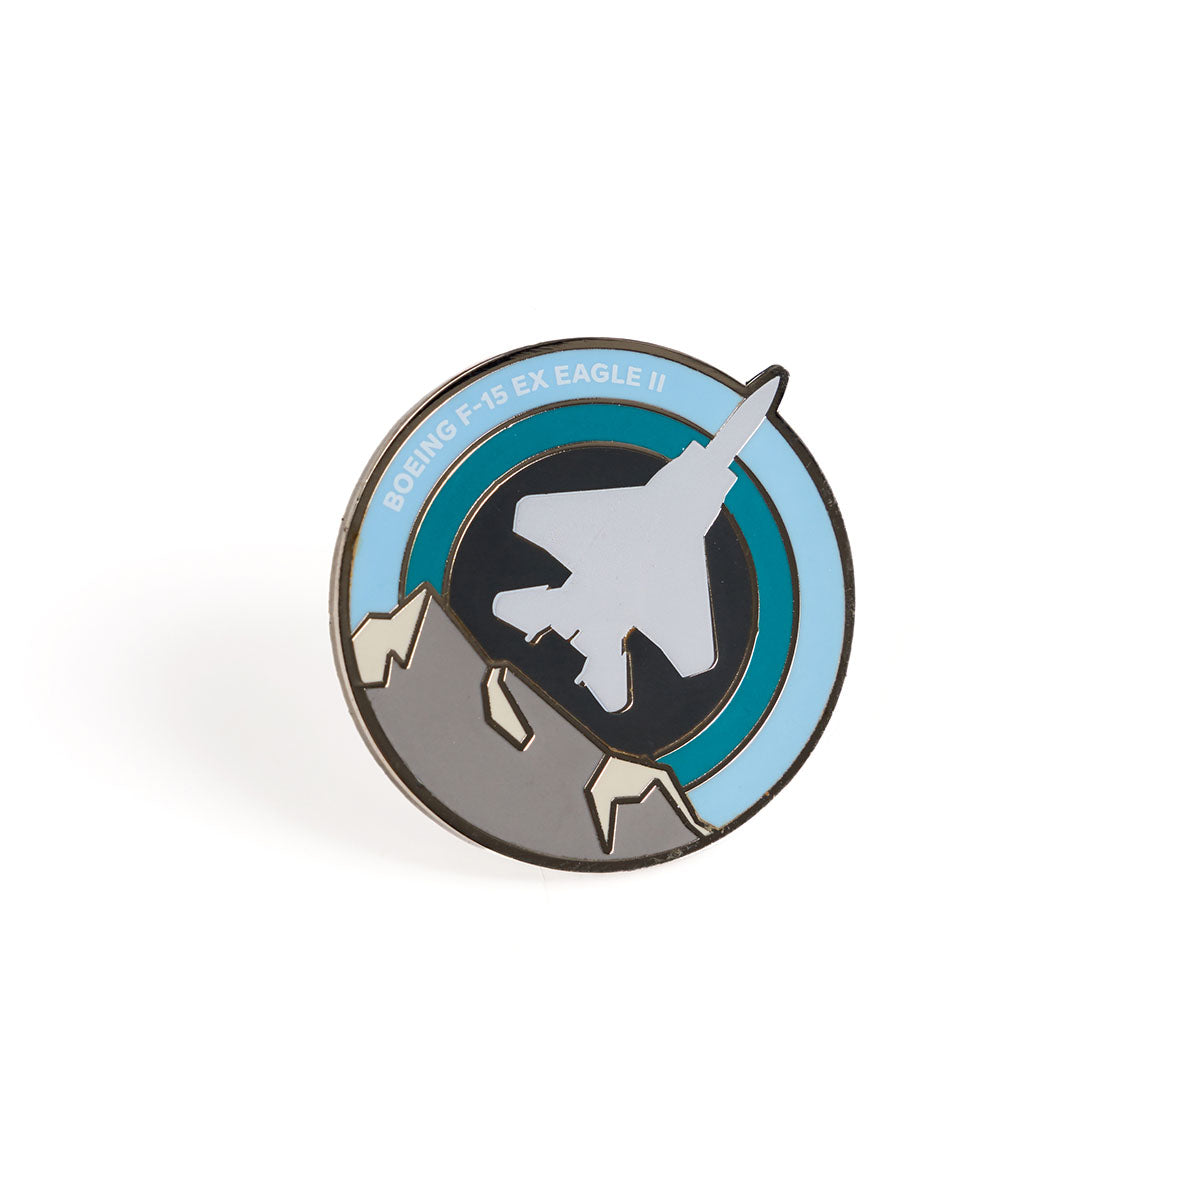 Skyward lapel pin, featuring the iconic Boeing F-15EX Eagle in an enamel roundel design.